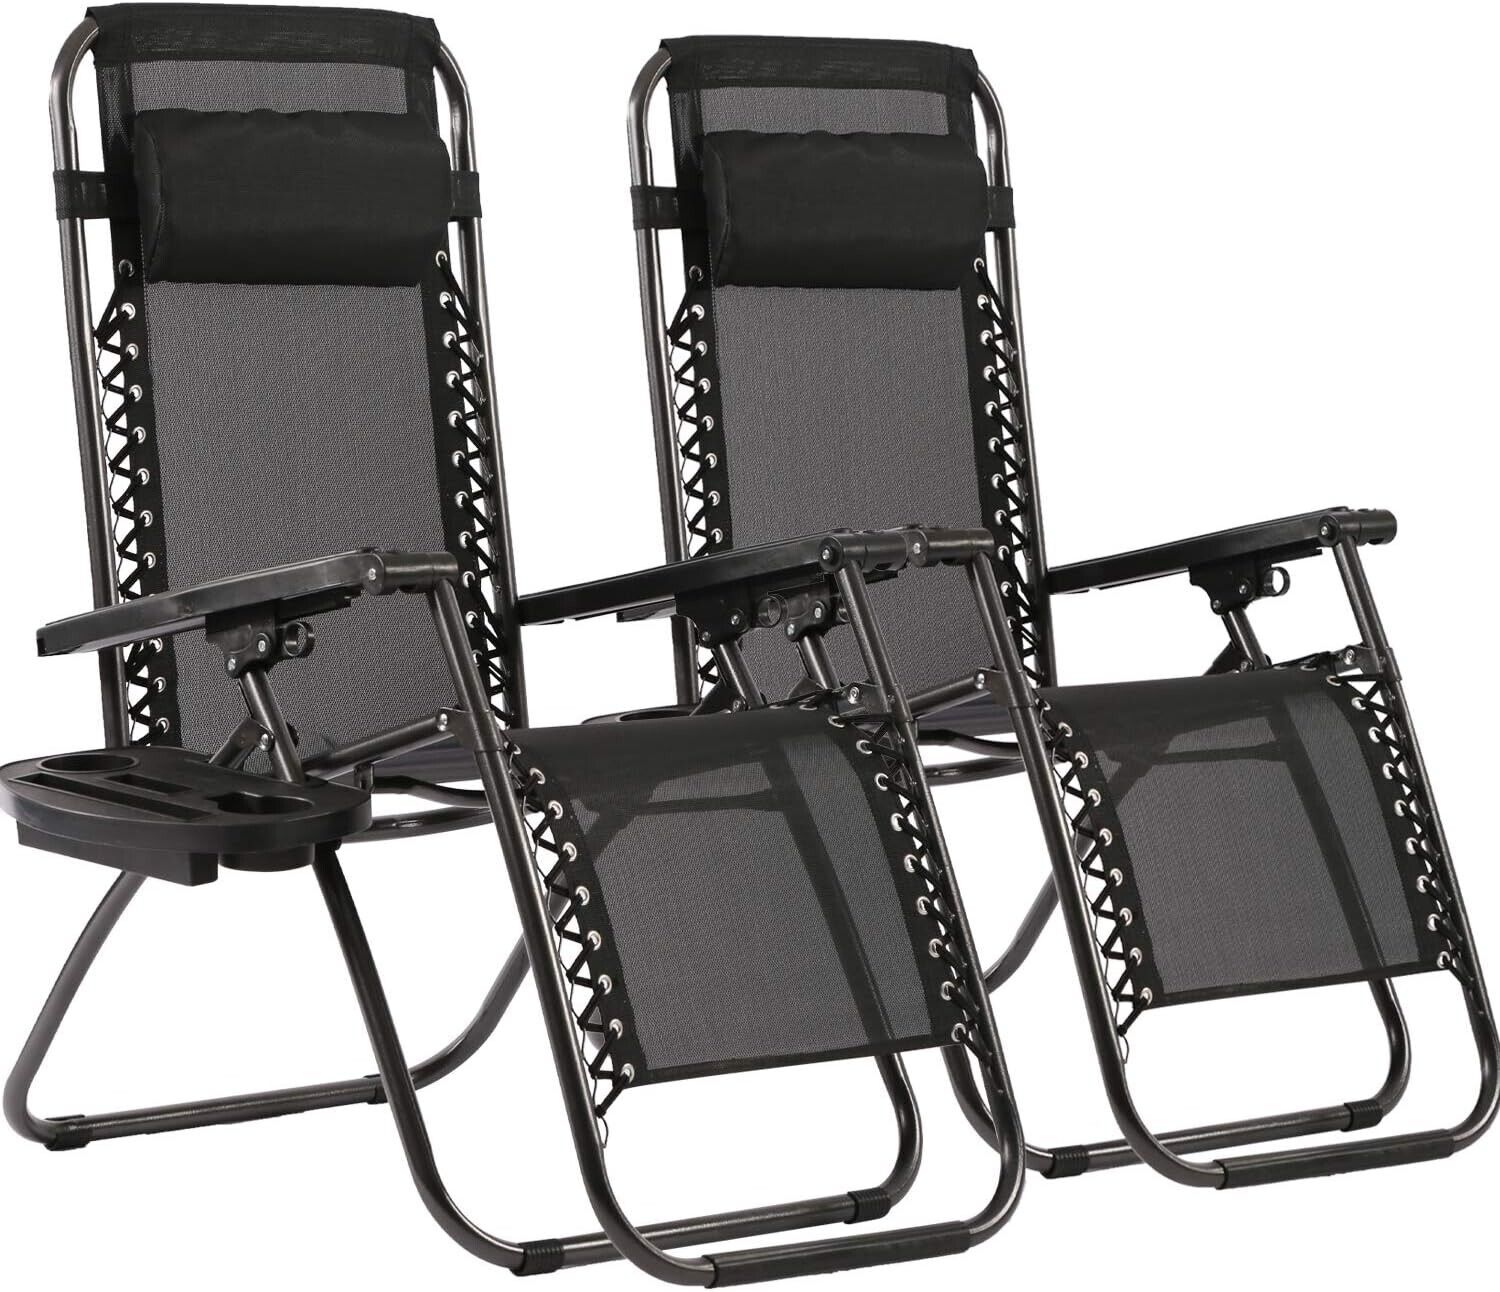 Set of 2 Zero Gravity Chair Lounge Chair Lawn Chair Outdoor Chair Deck Chairs